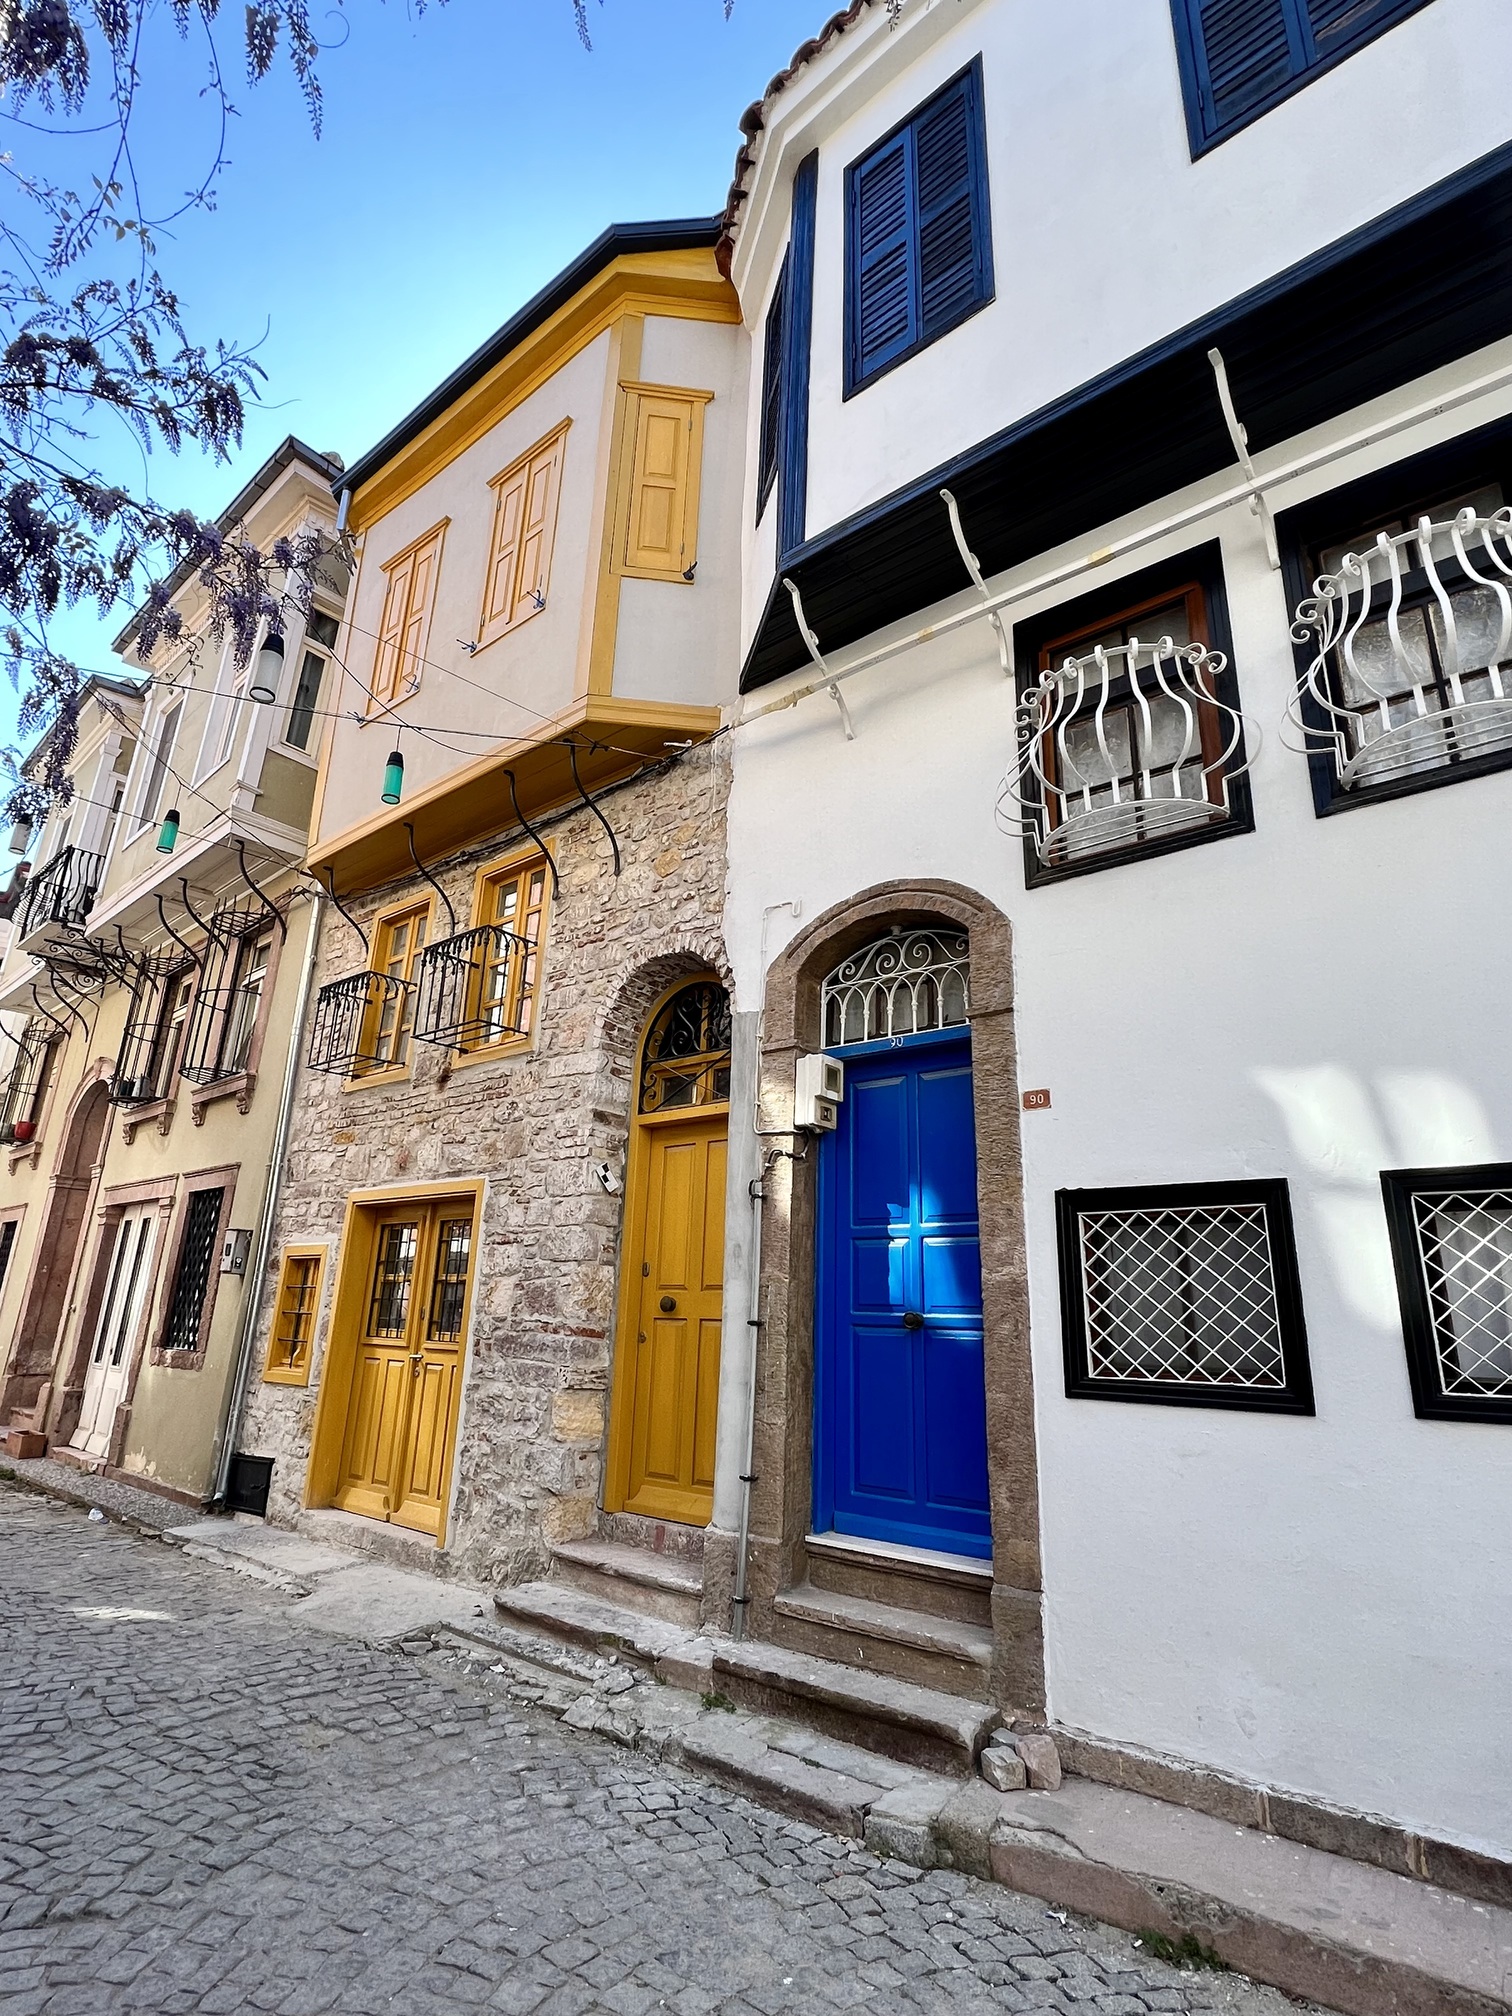 Explore the diverse landscapes and cultural heritage of Turkey in this captivating image showcasing iconic landmarks and natural beauty; travel guide to Ayvalik